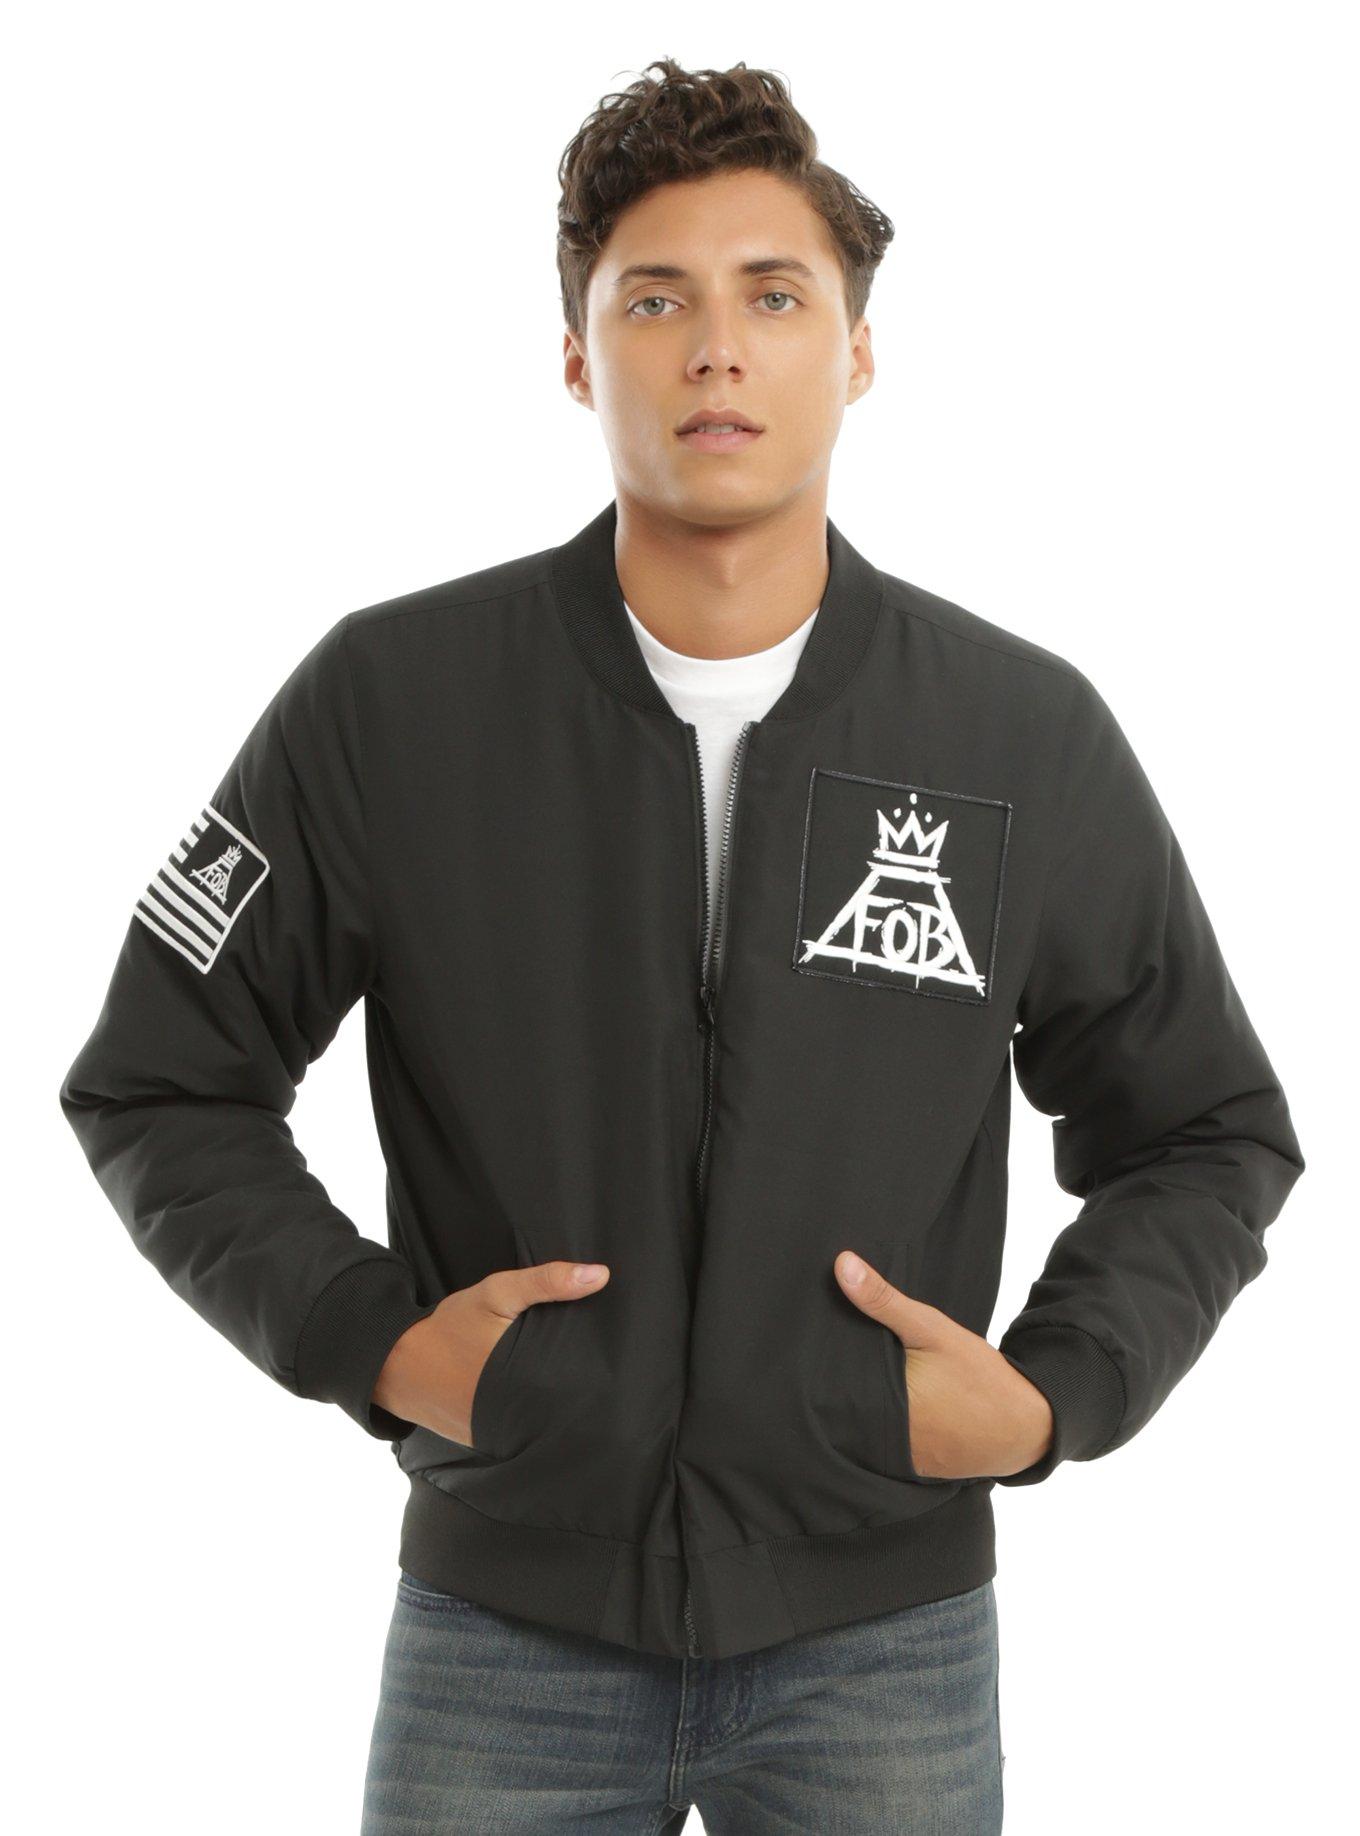 Fall Out Boy Boys Of Zummer This Is Our Culture Tour Bomber Jacket, BLACK, hi-res